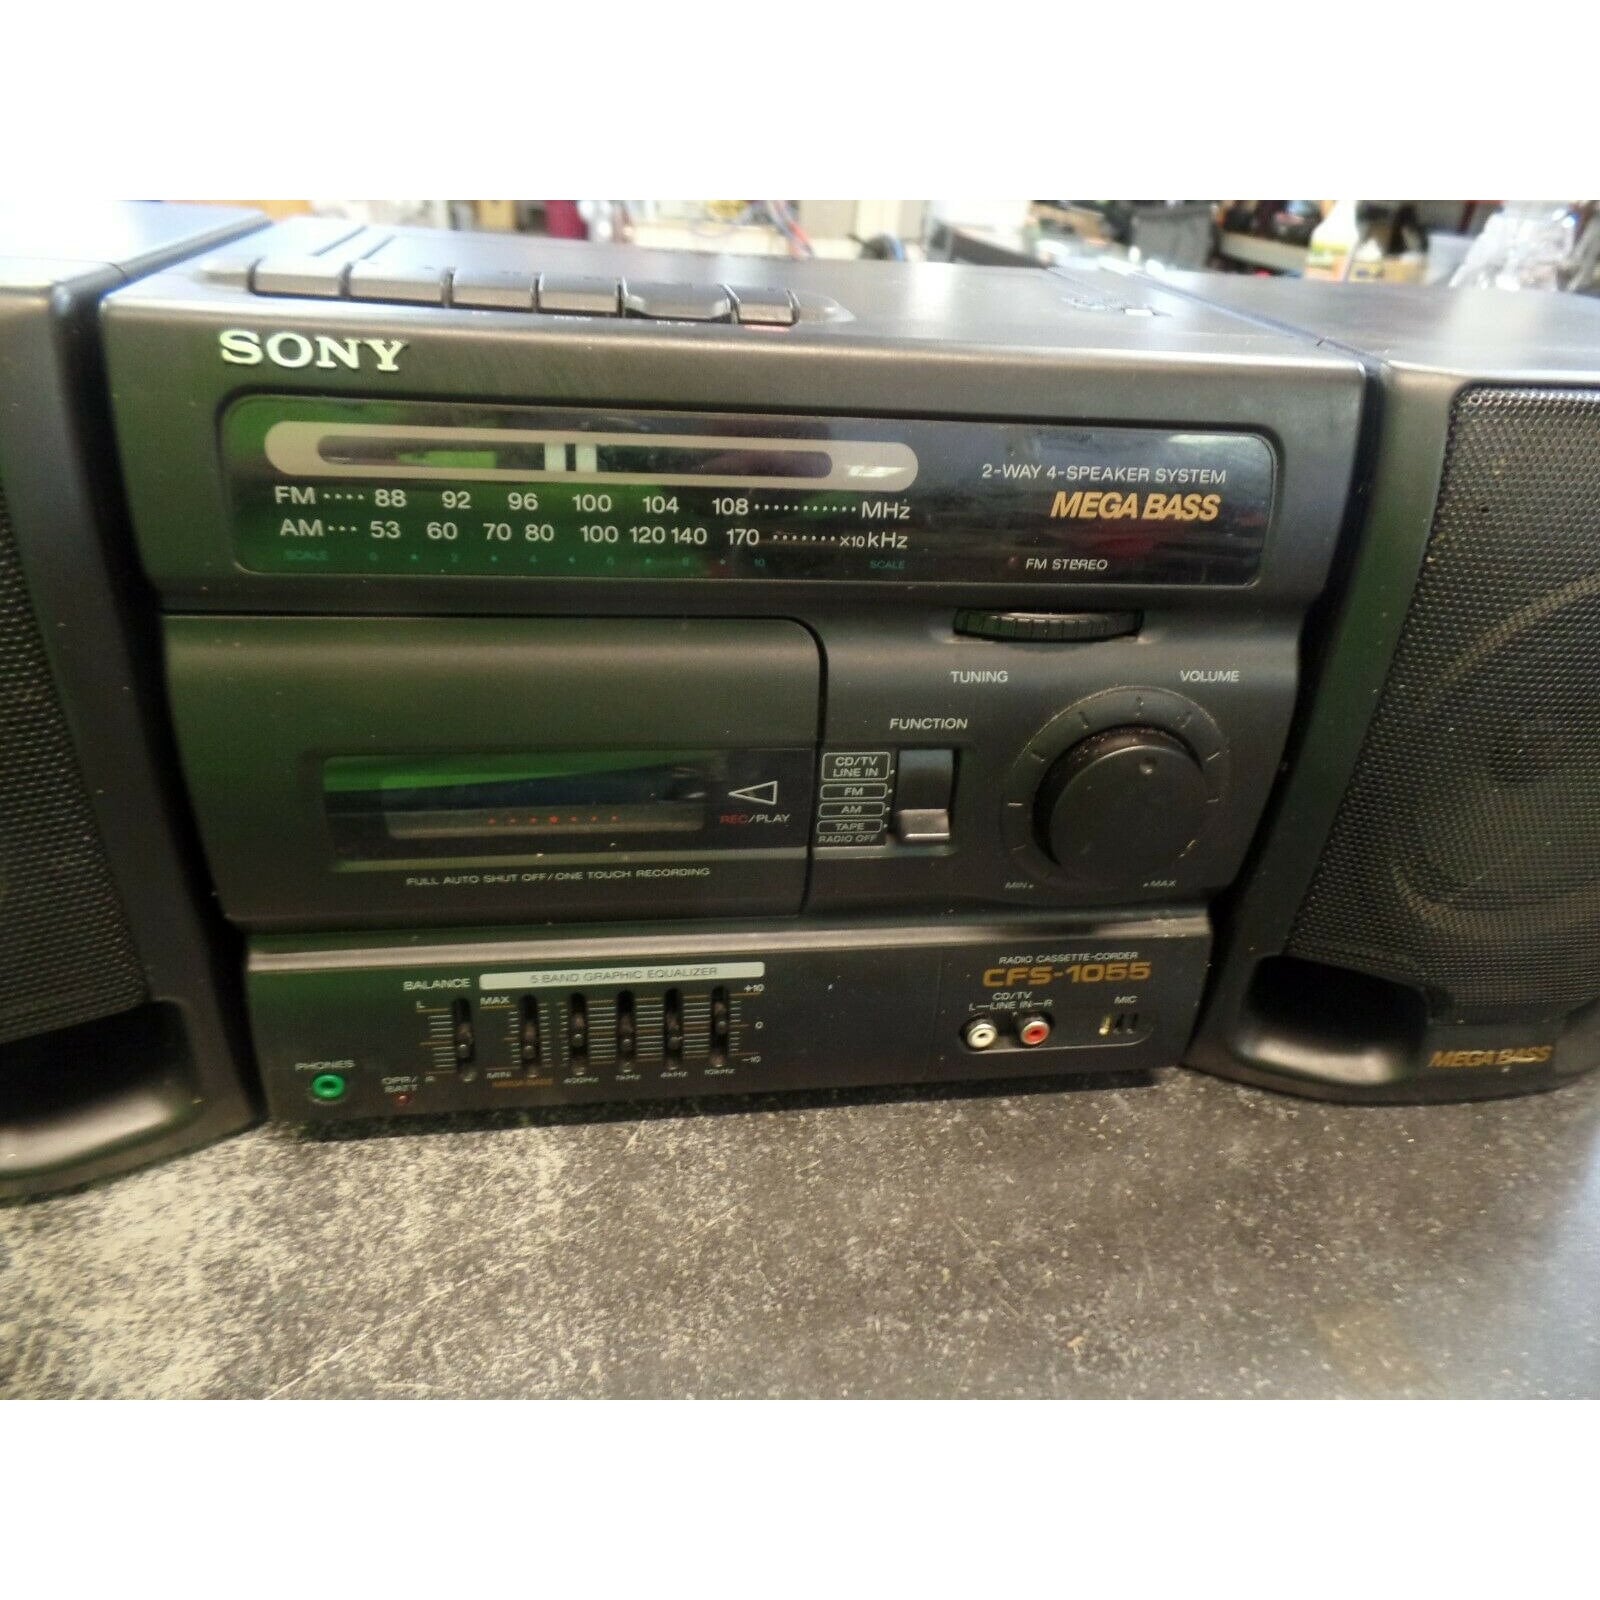 Sony CFS-1055 AM/FM Cassette Player Boombox 5-band Equalizer Mega Bass -  Etsy